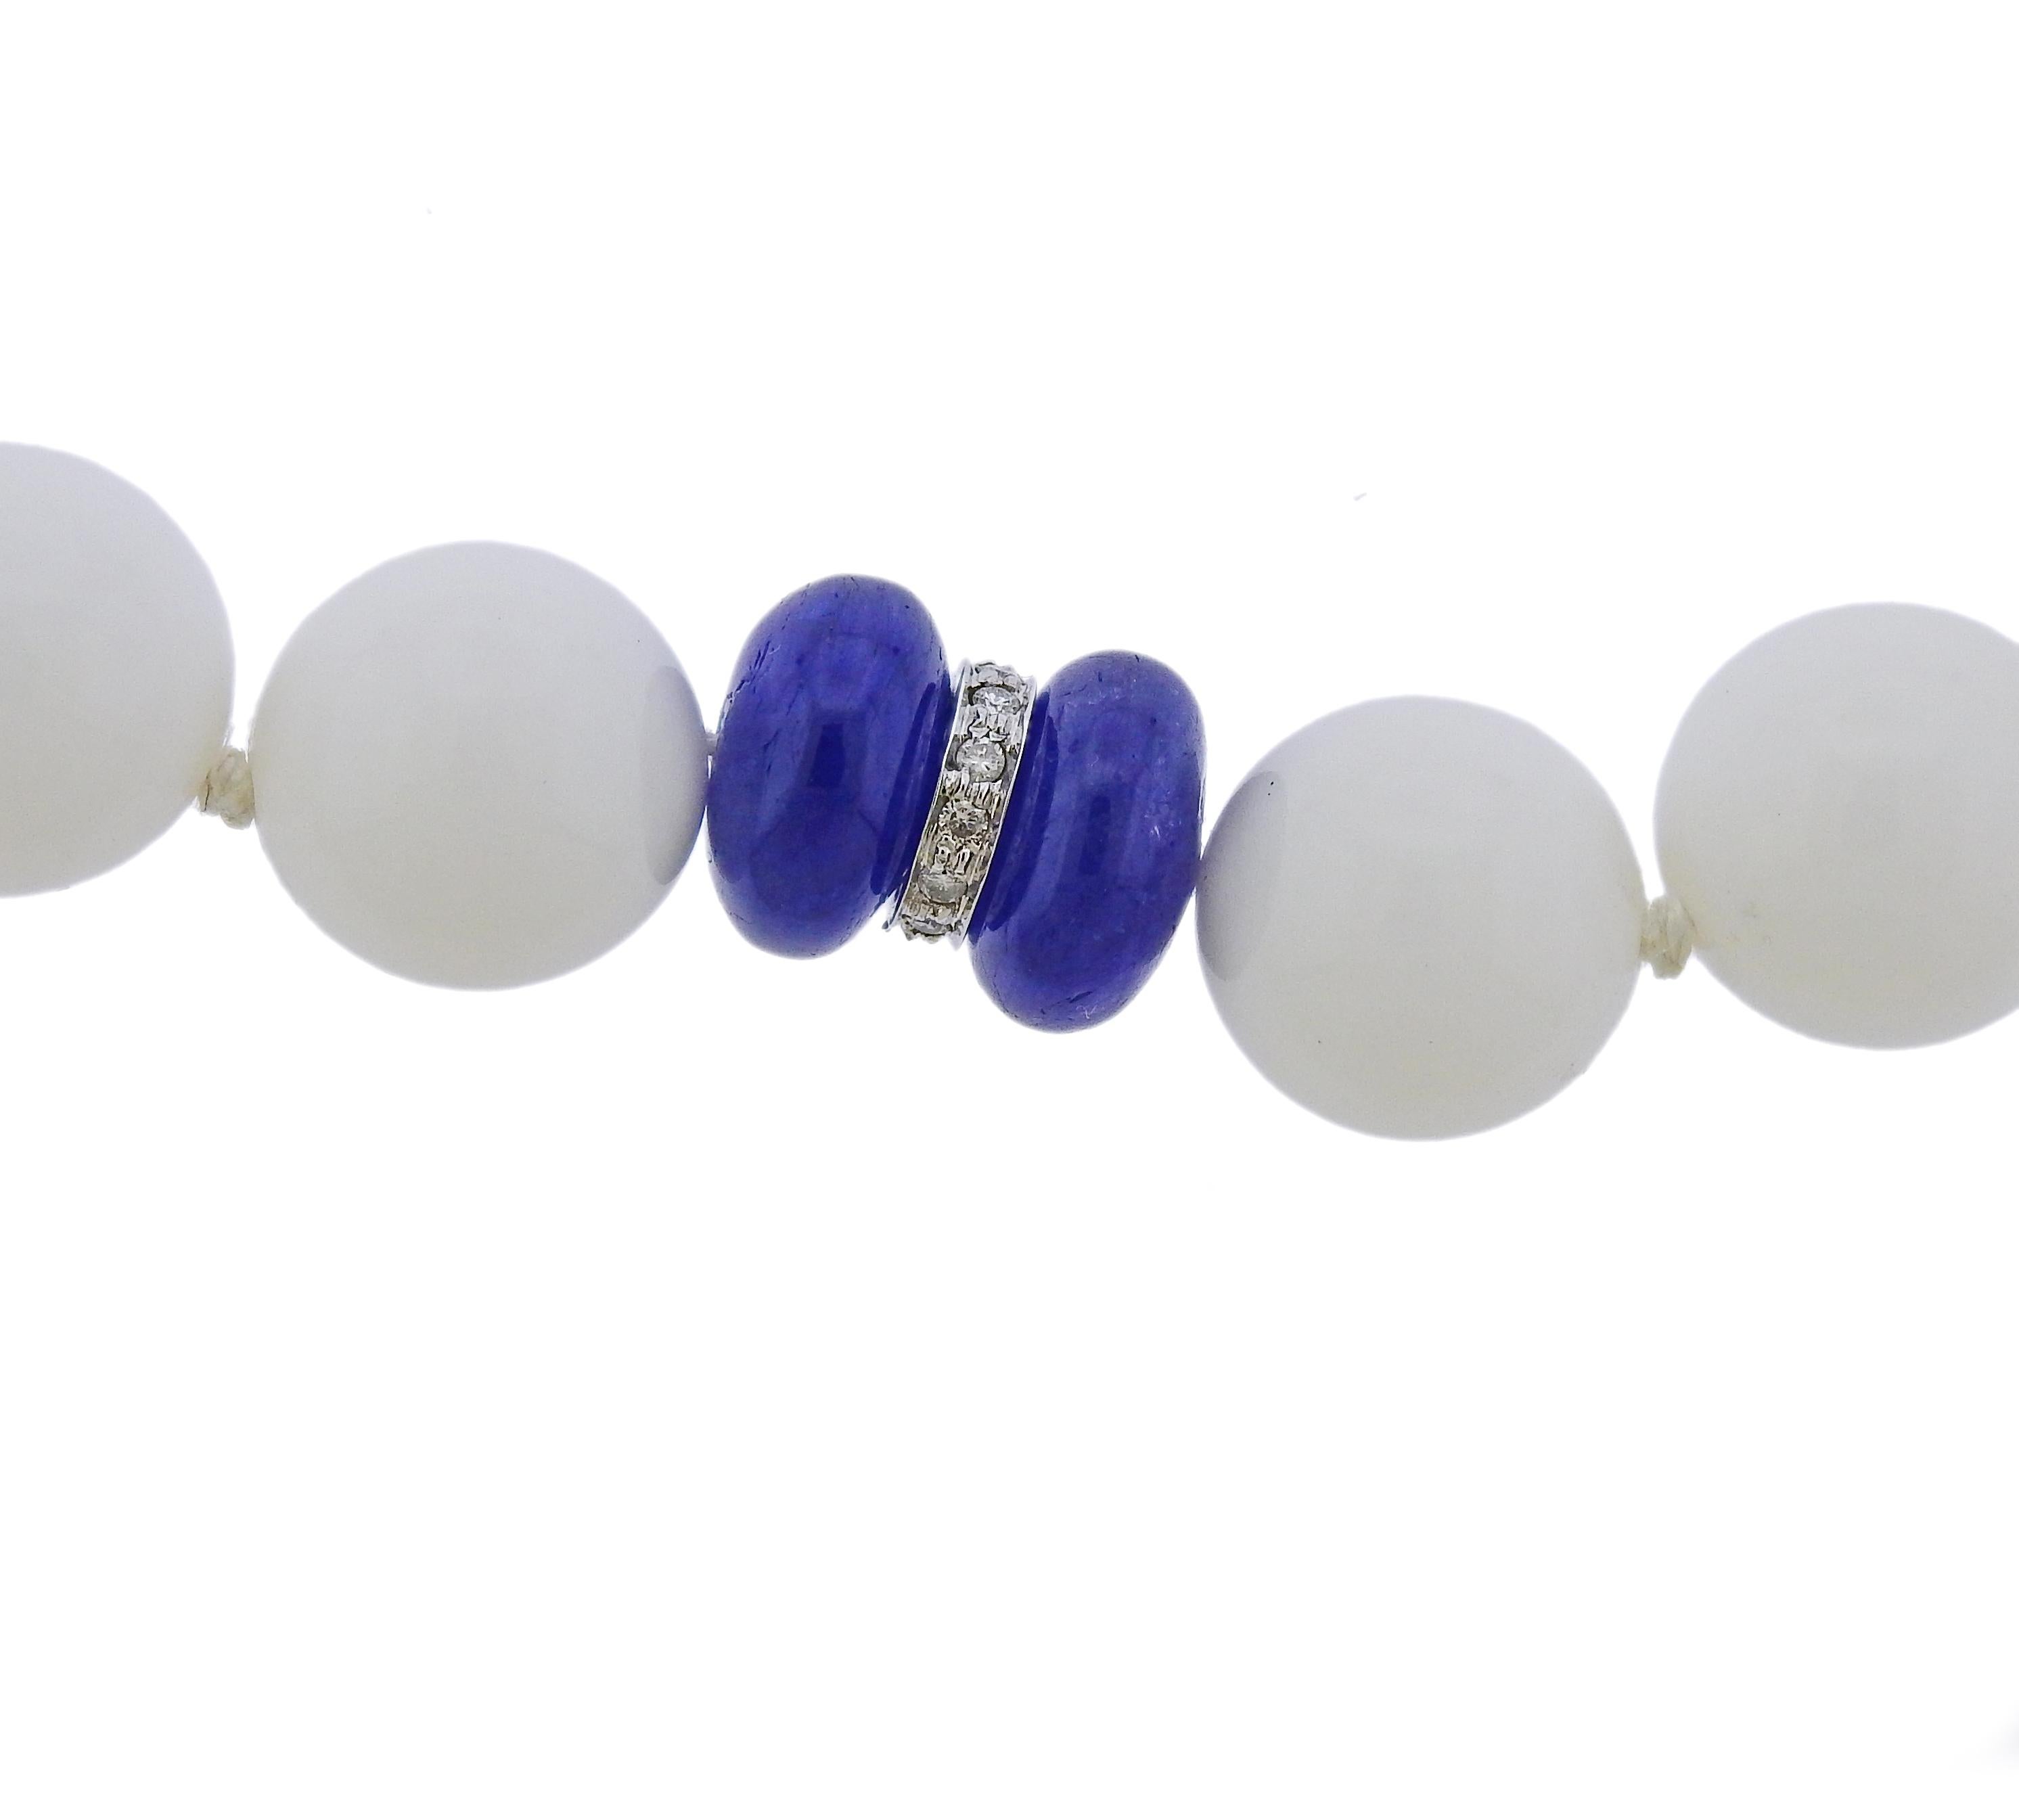 Seaman Schepps 18k white gold necklace with 12mm to 12.3mm white agate beads and 8mm x12mm sapphire diamond spacers. Necklace is 16.5